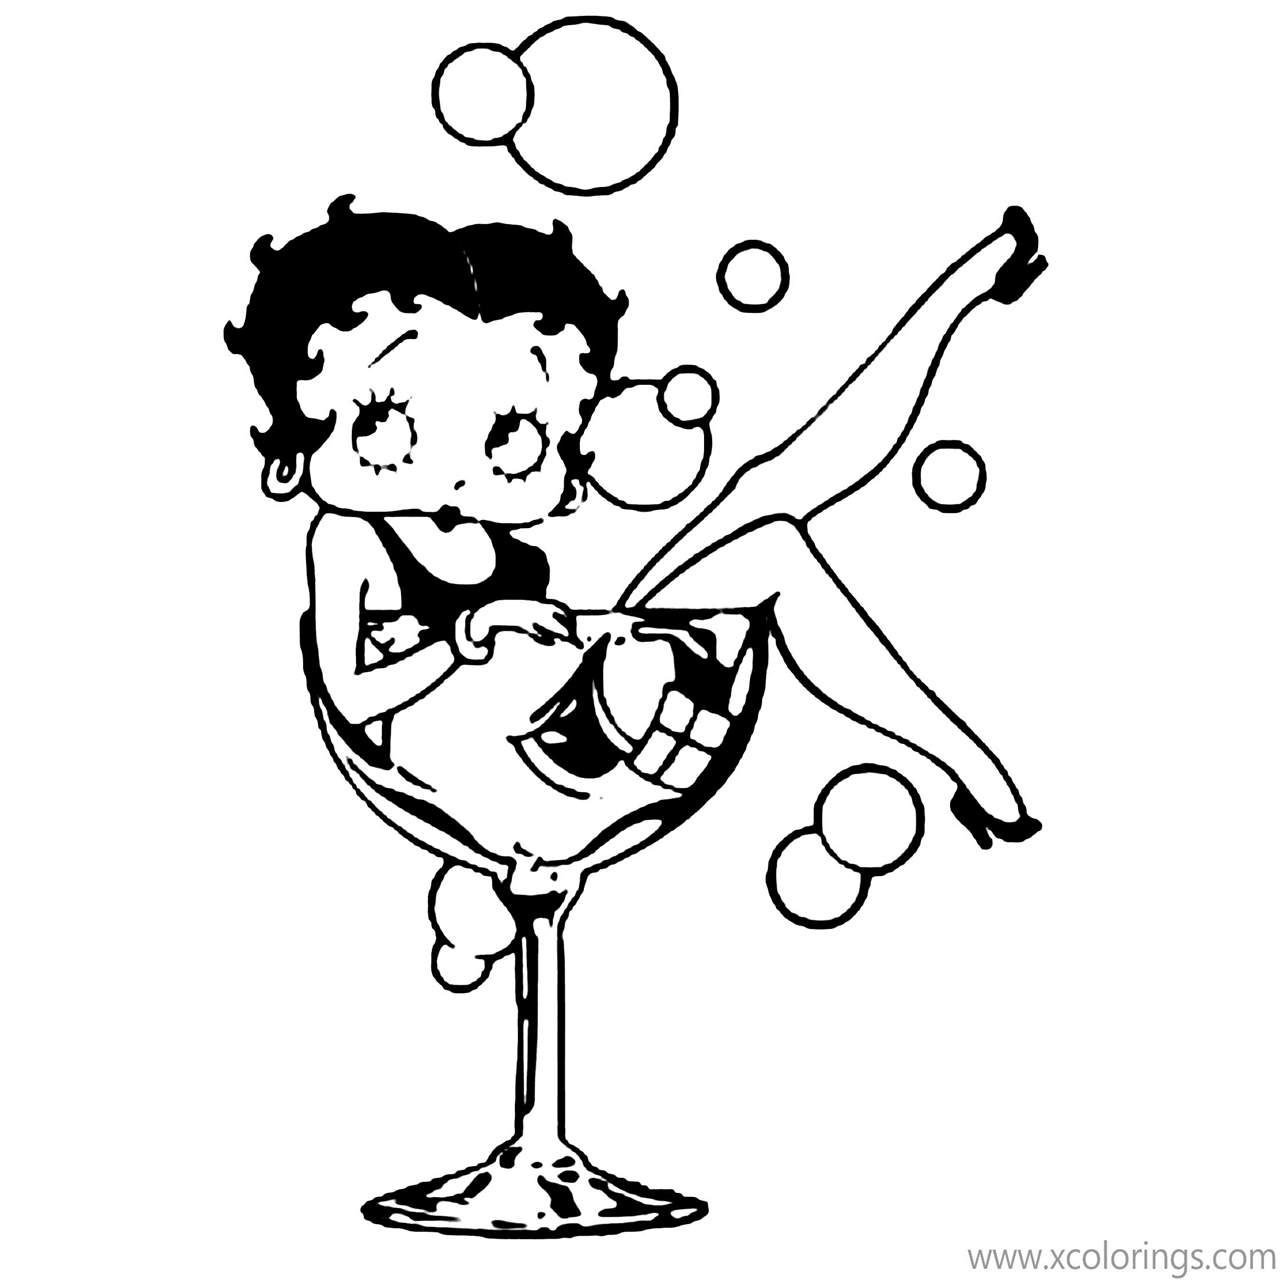 Free Betty Boop Coloring Pages with Bubbles printable